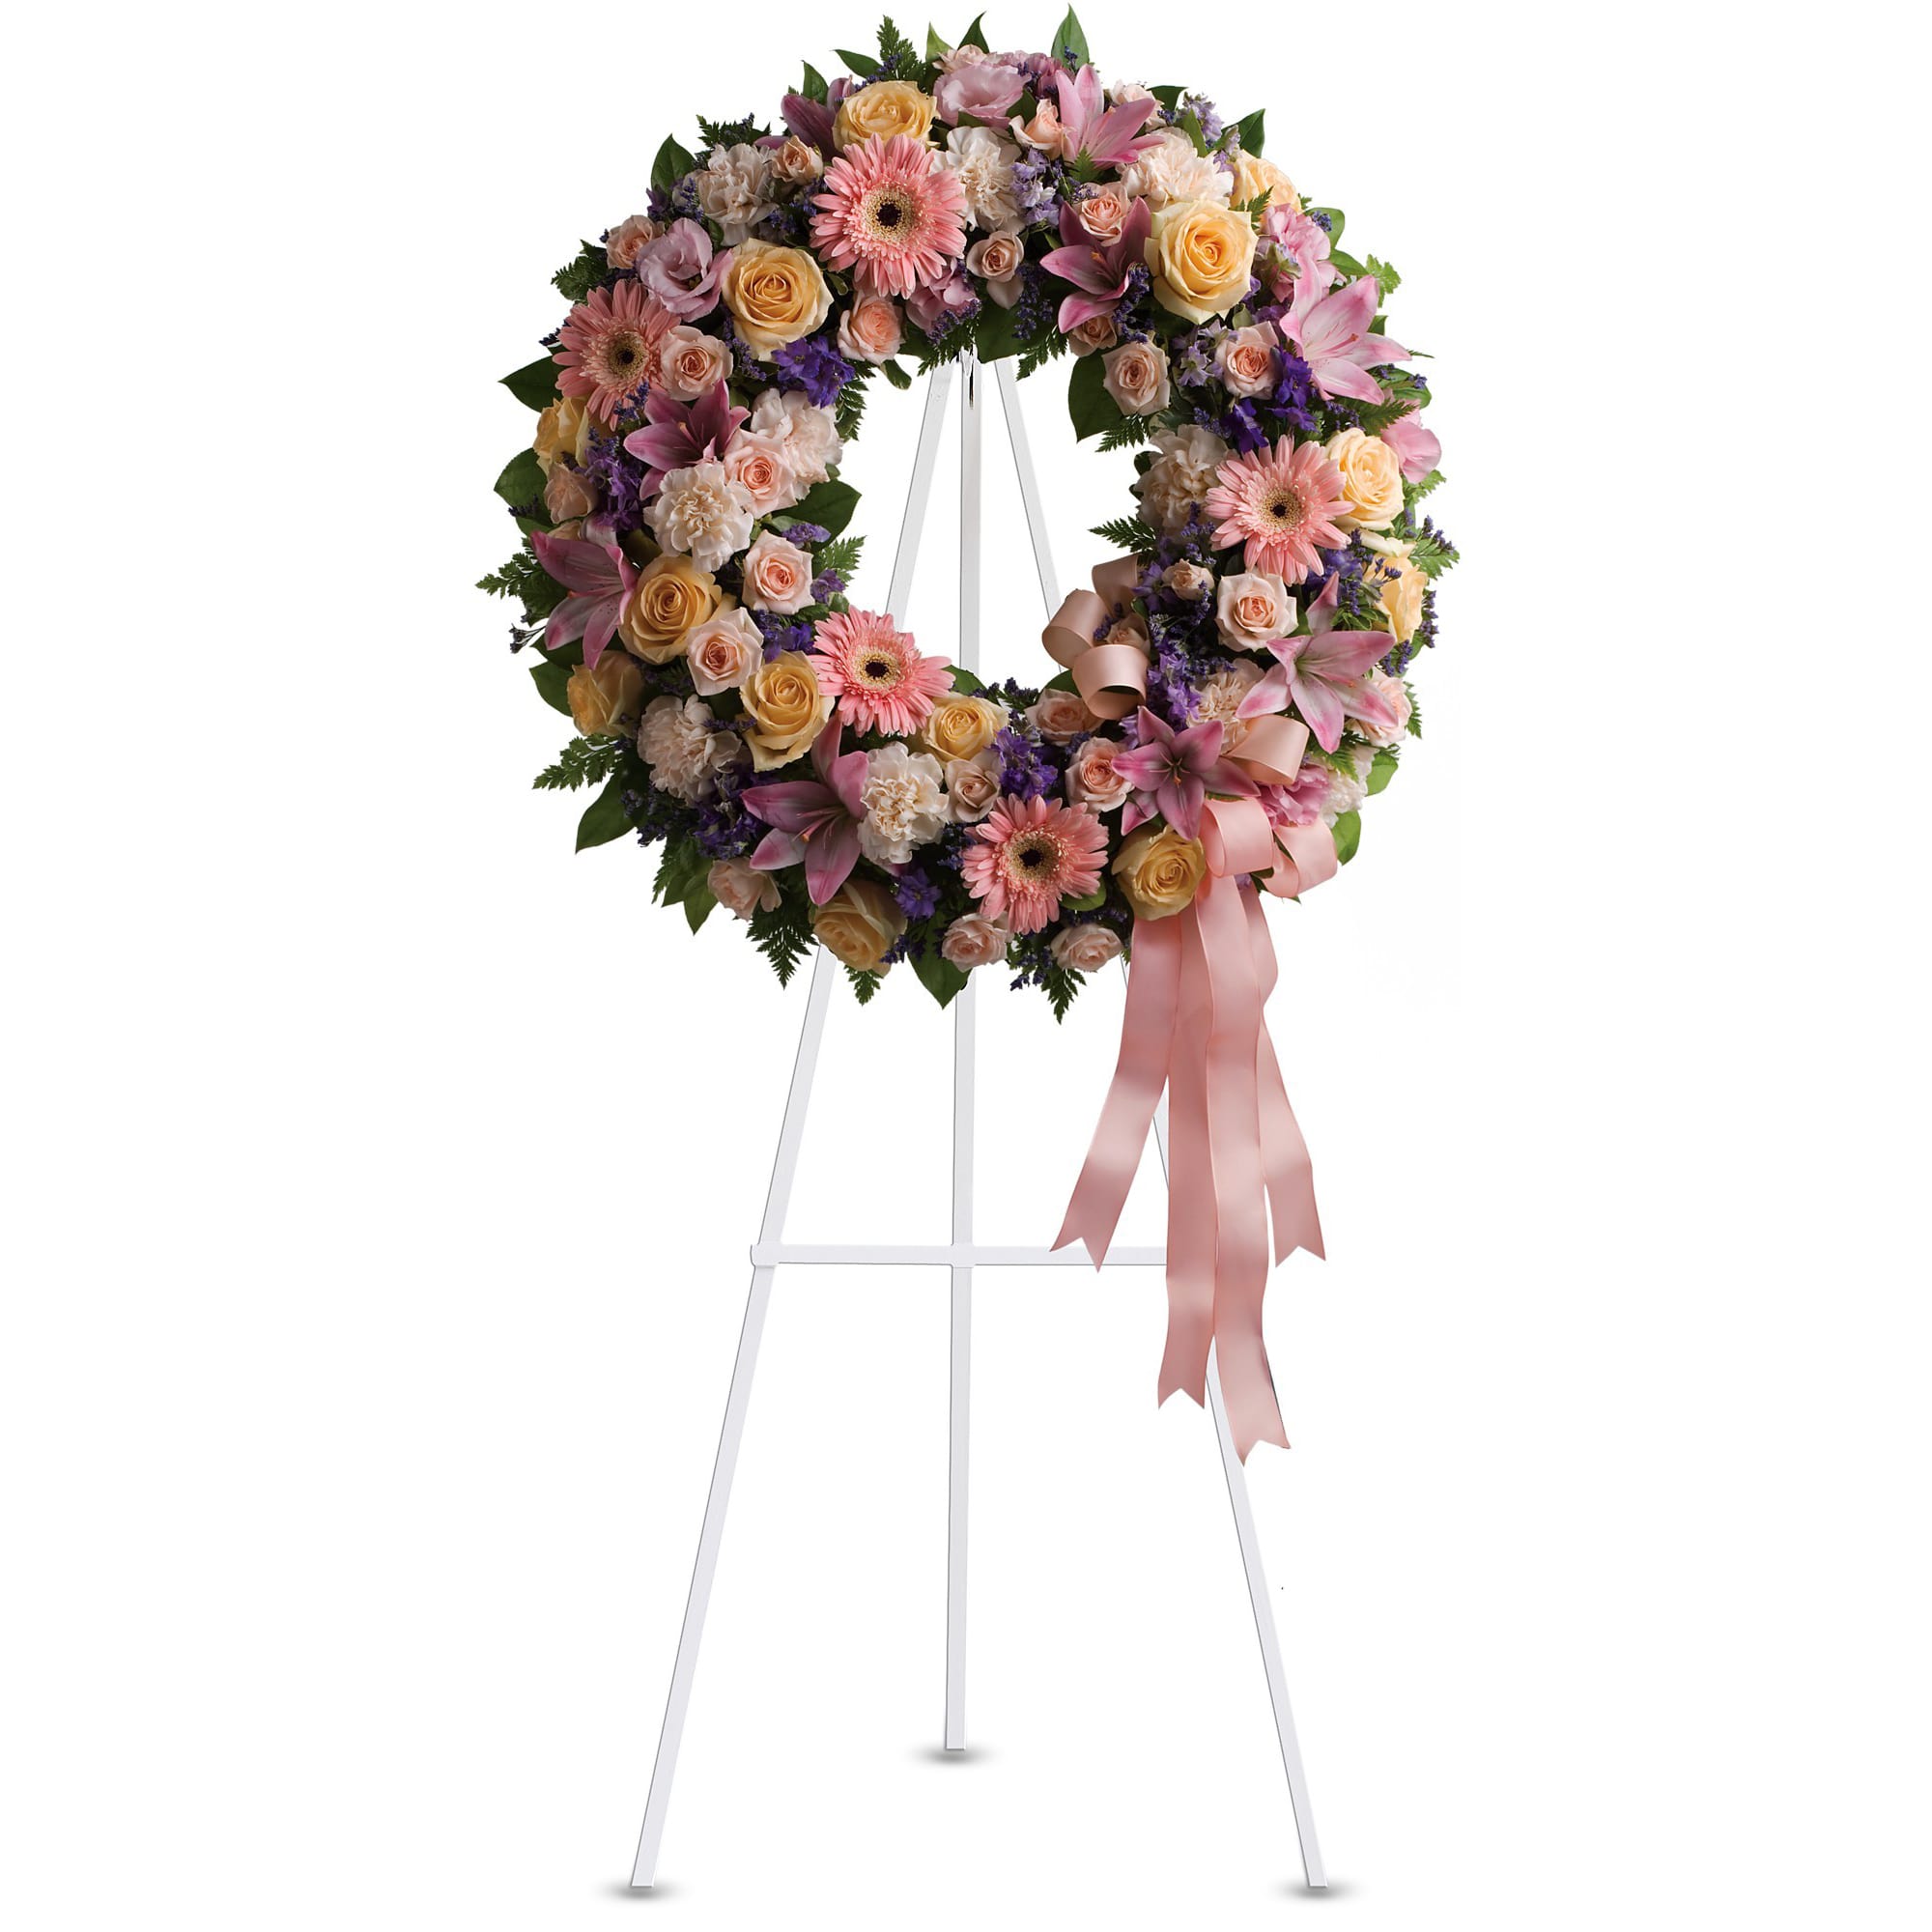 Graceful Wreath A103 - Family and friends will recollect how special their loved one was with this gentle and timeless circle of fragrant blooms to celebrate sweet memories. 